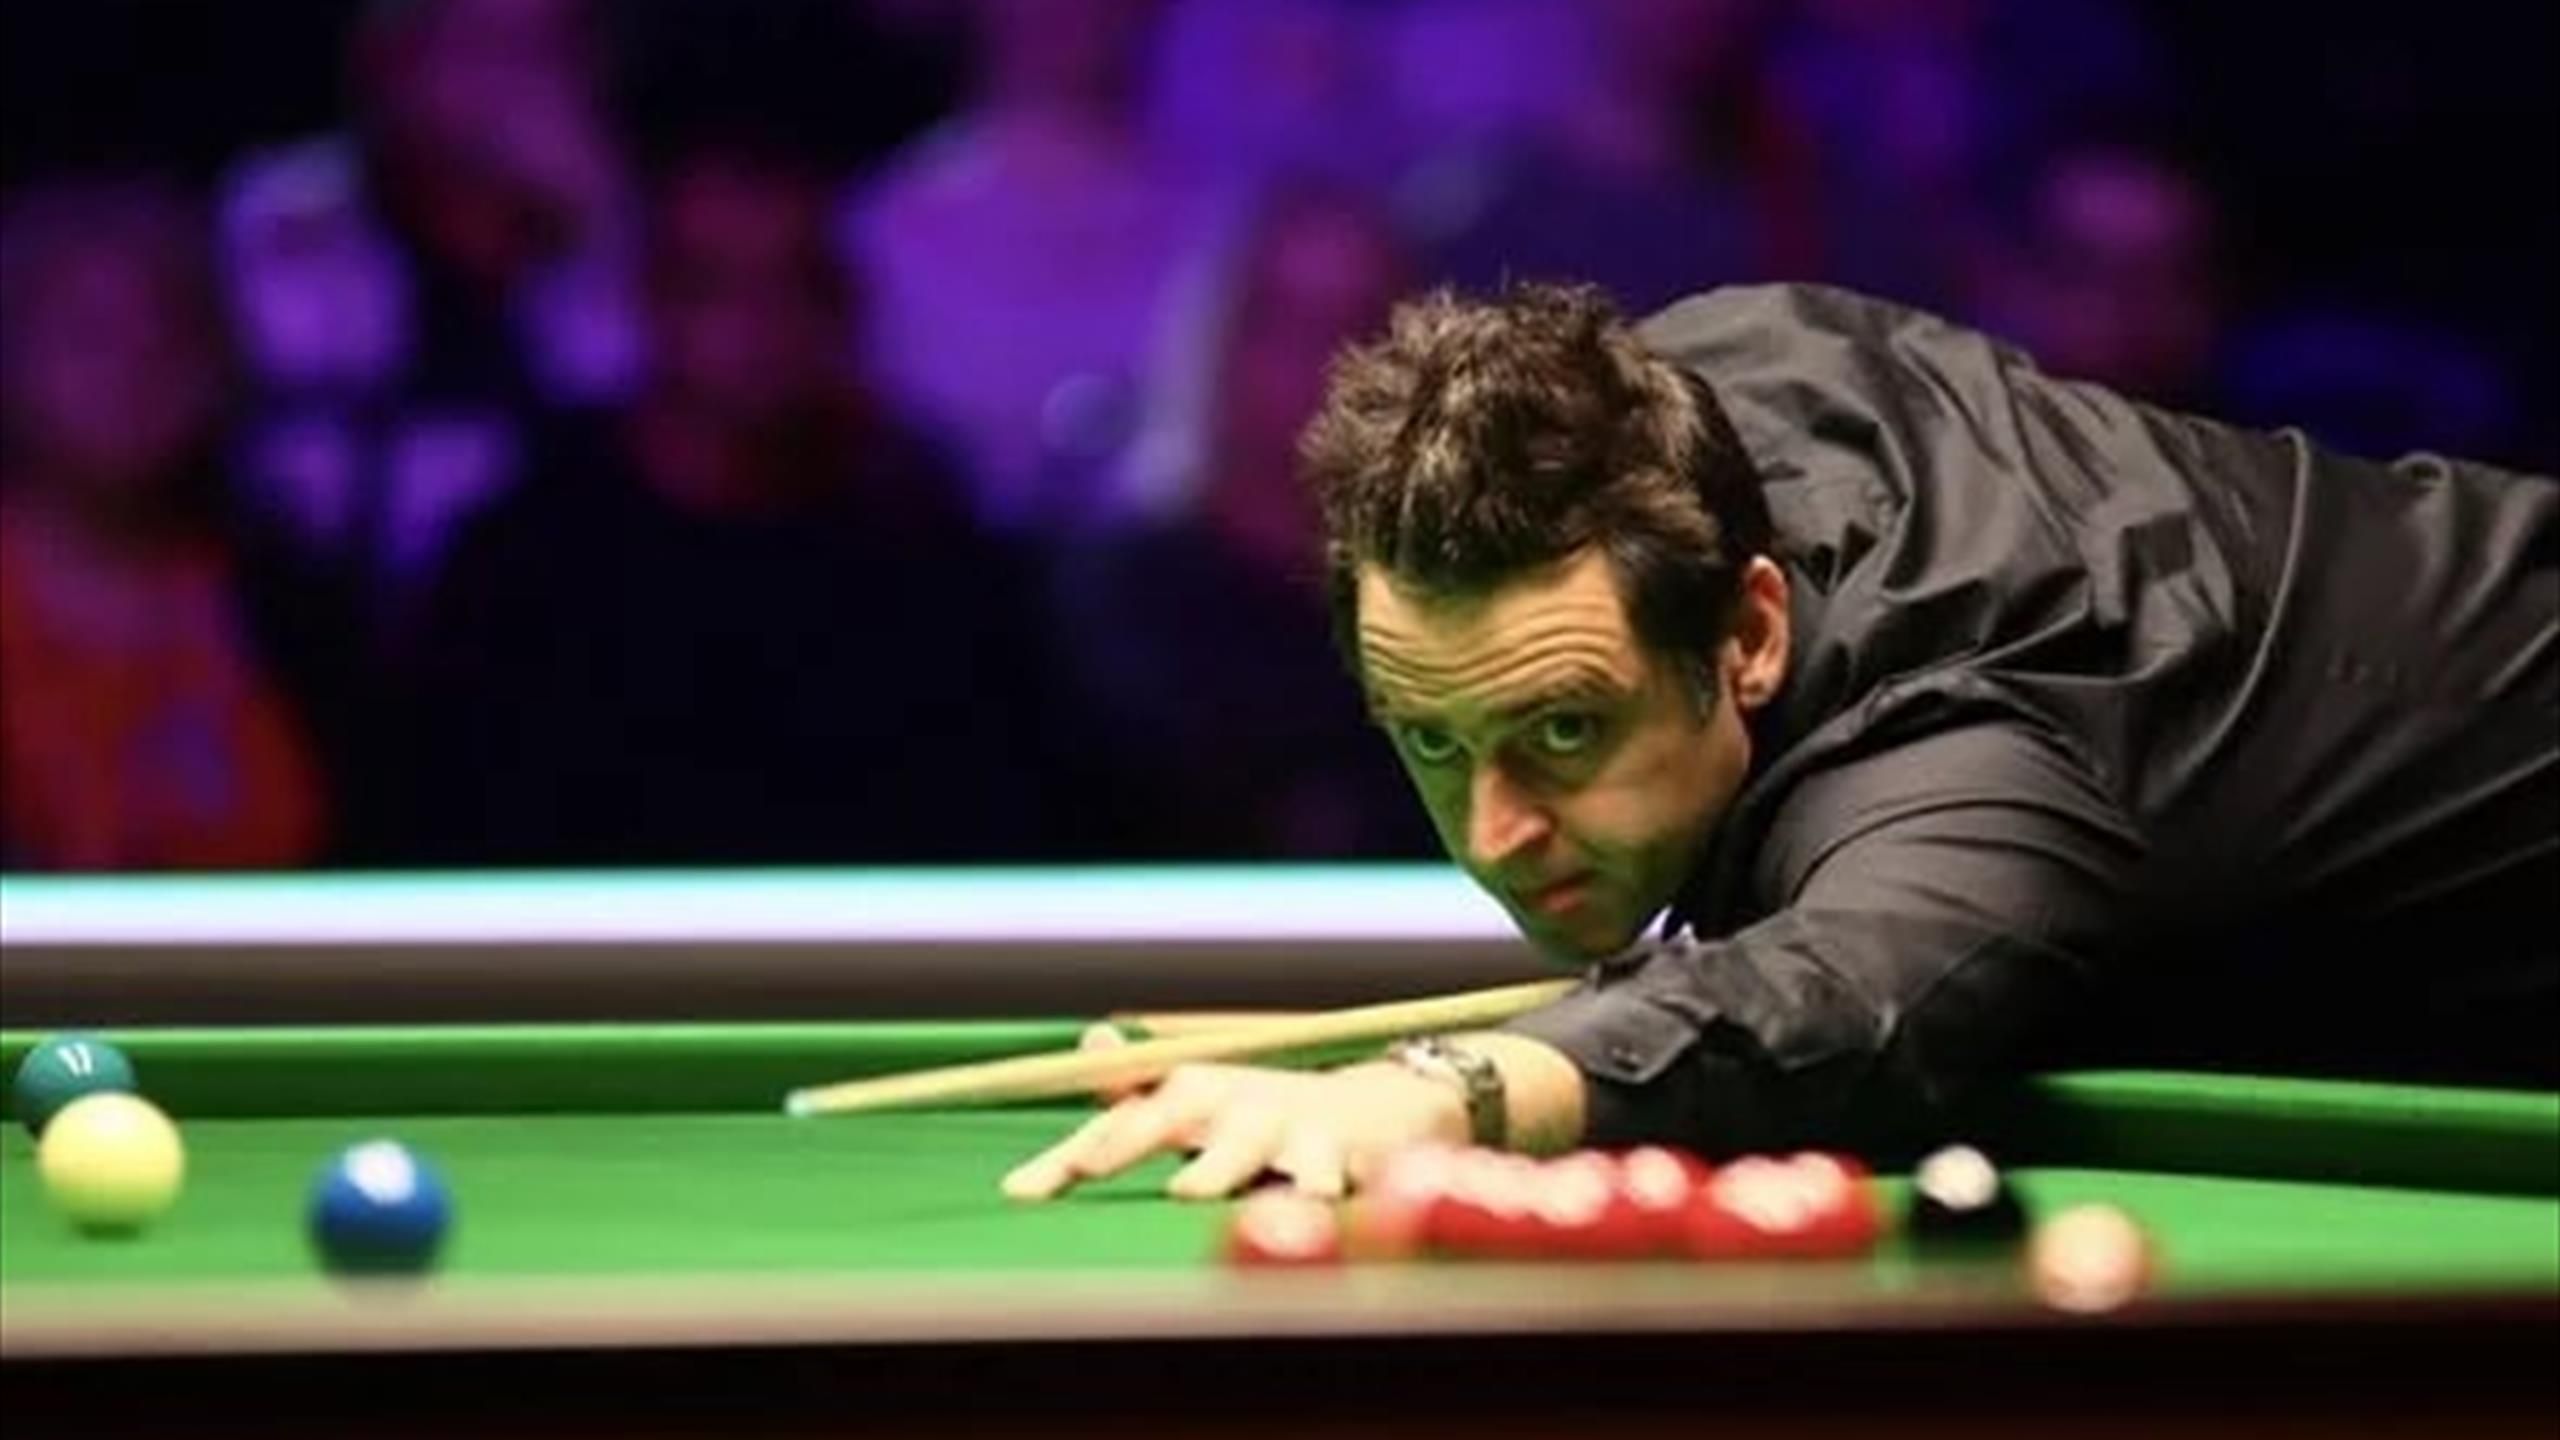 Players Championship snooker 2022 LIVE Ronnie OSullivan sizzles to topple Judd Trump with vintage Rocket display